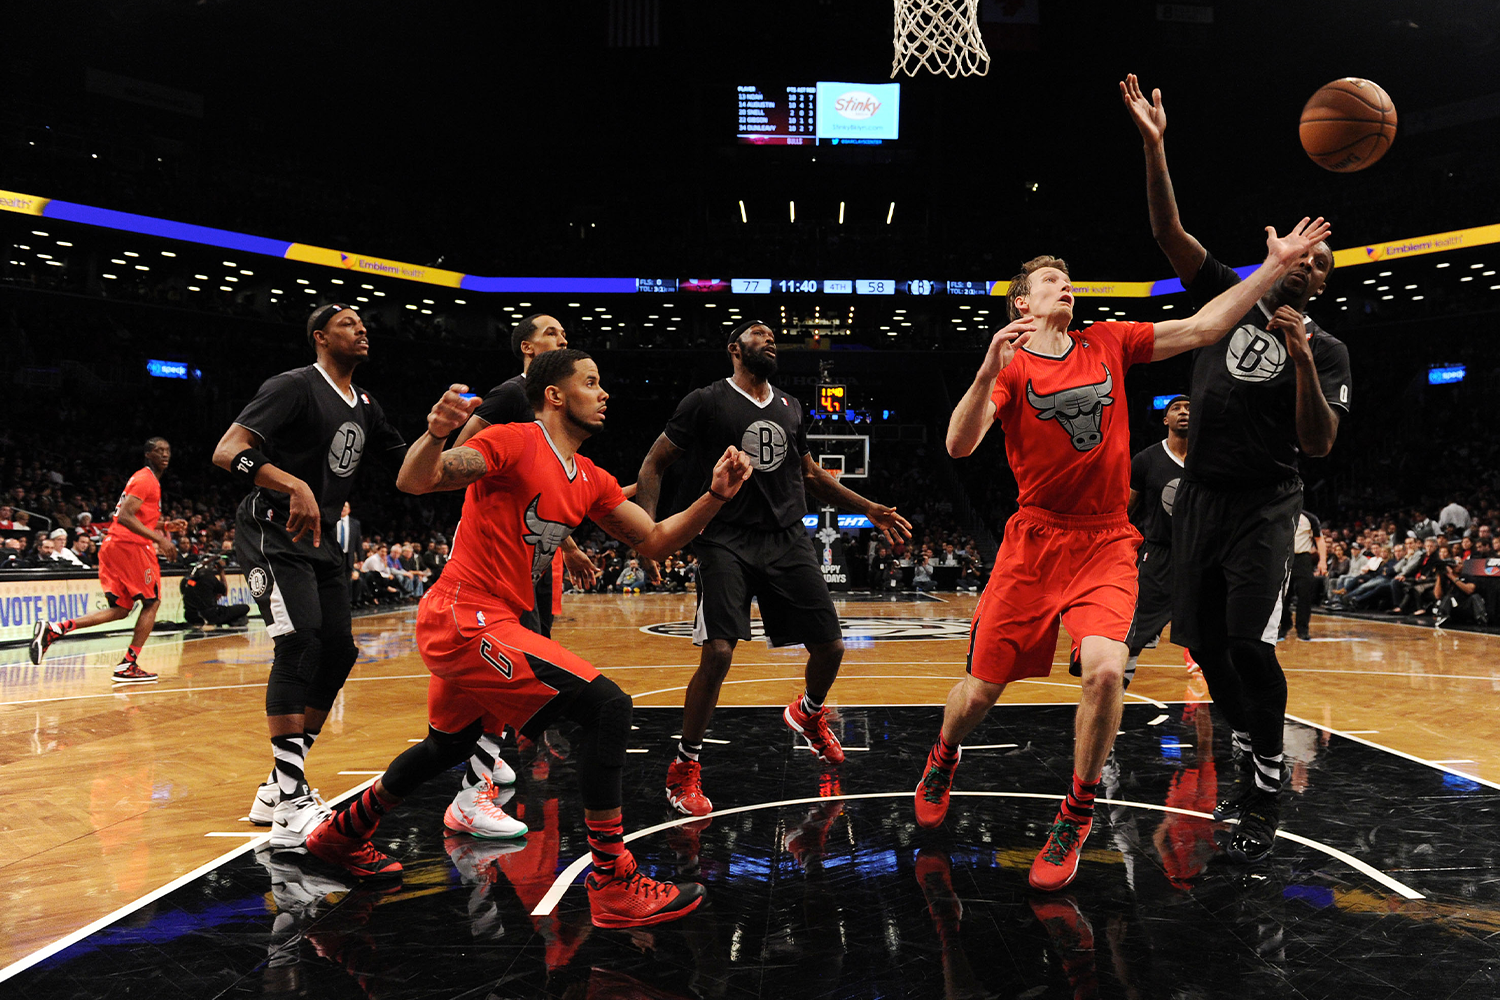 The Nets and Bulls in the 2013 "Big Logo" uniforms